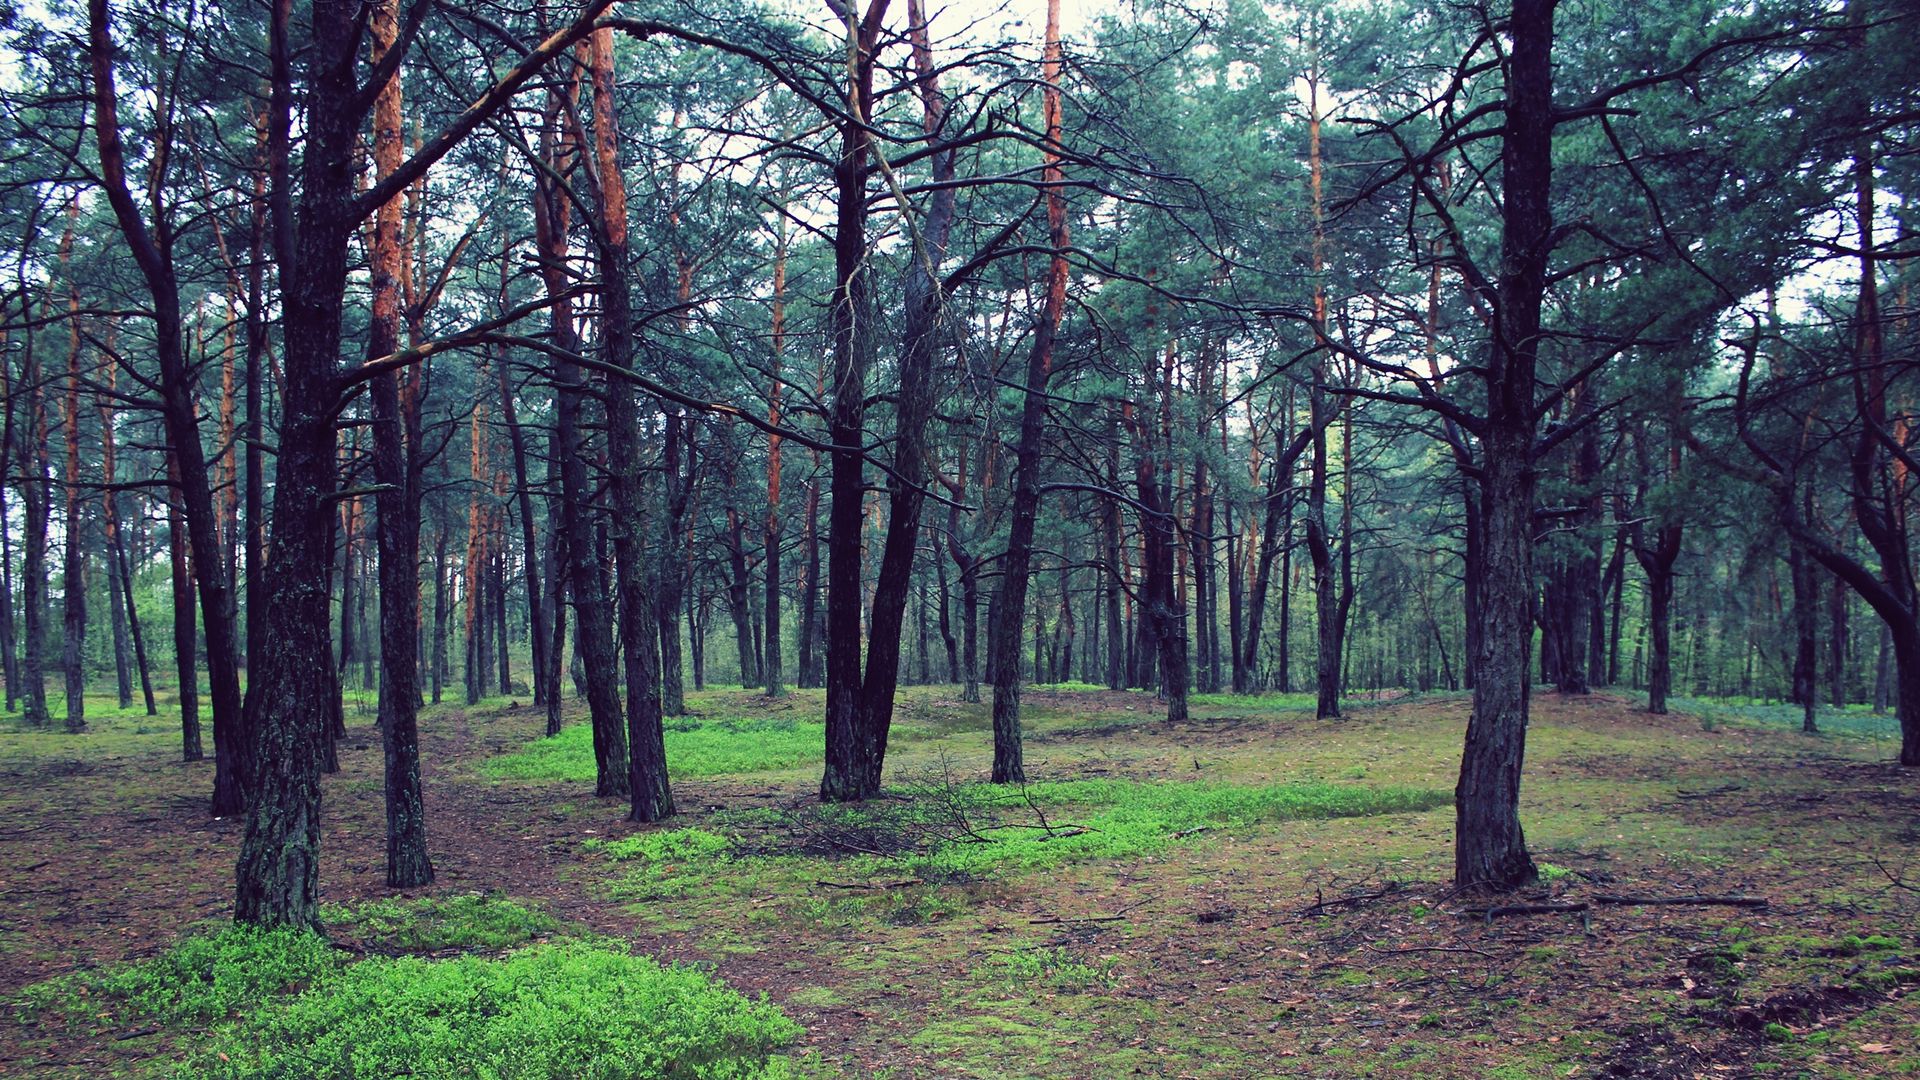 Download wallpaper 1920x1080 forest, trees, nature, landscape full hd ...